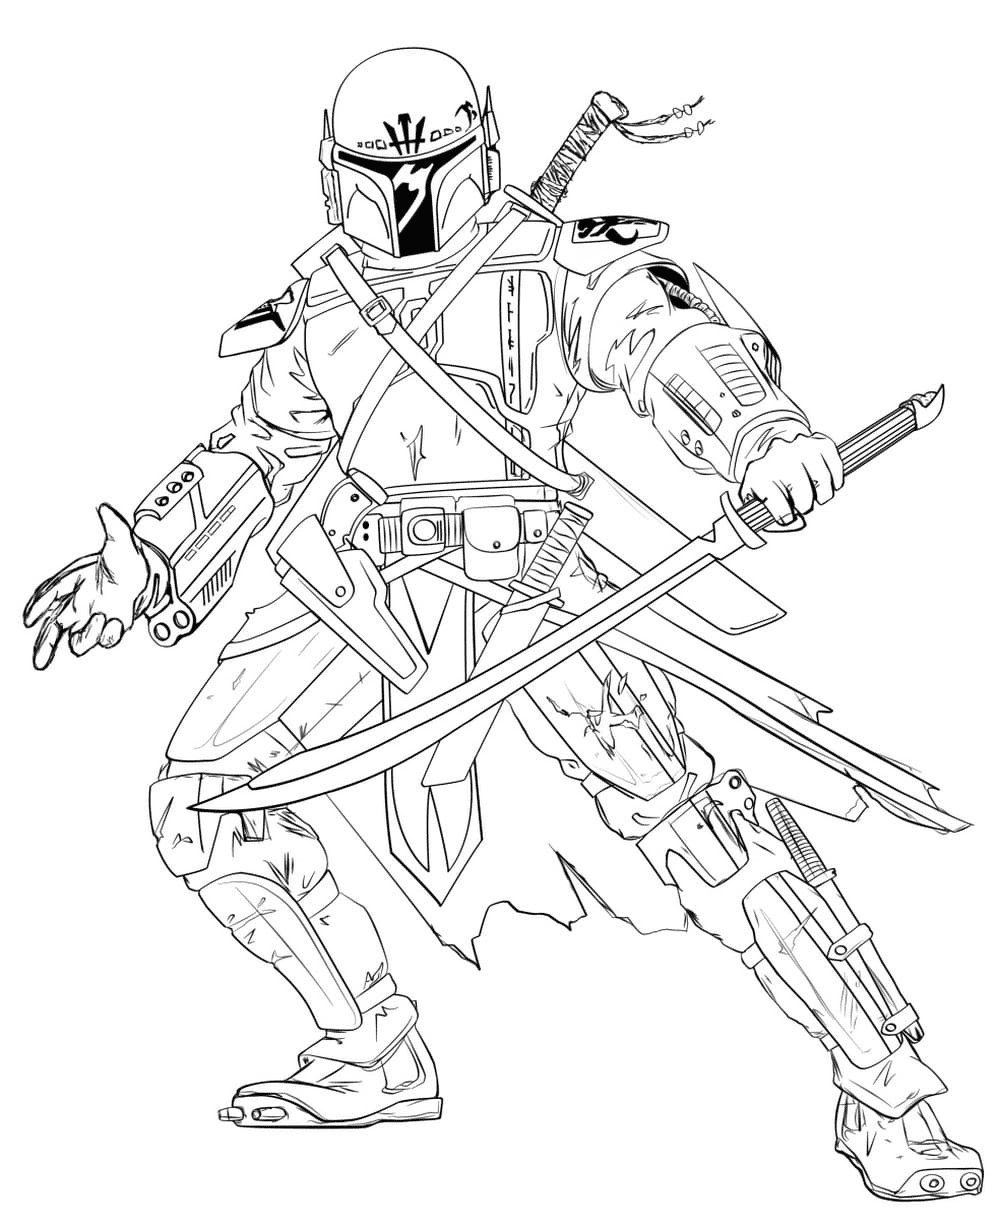 Mandalorian with sword Coloring Page